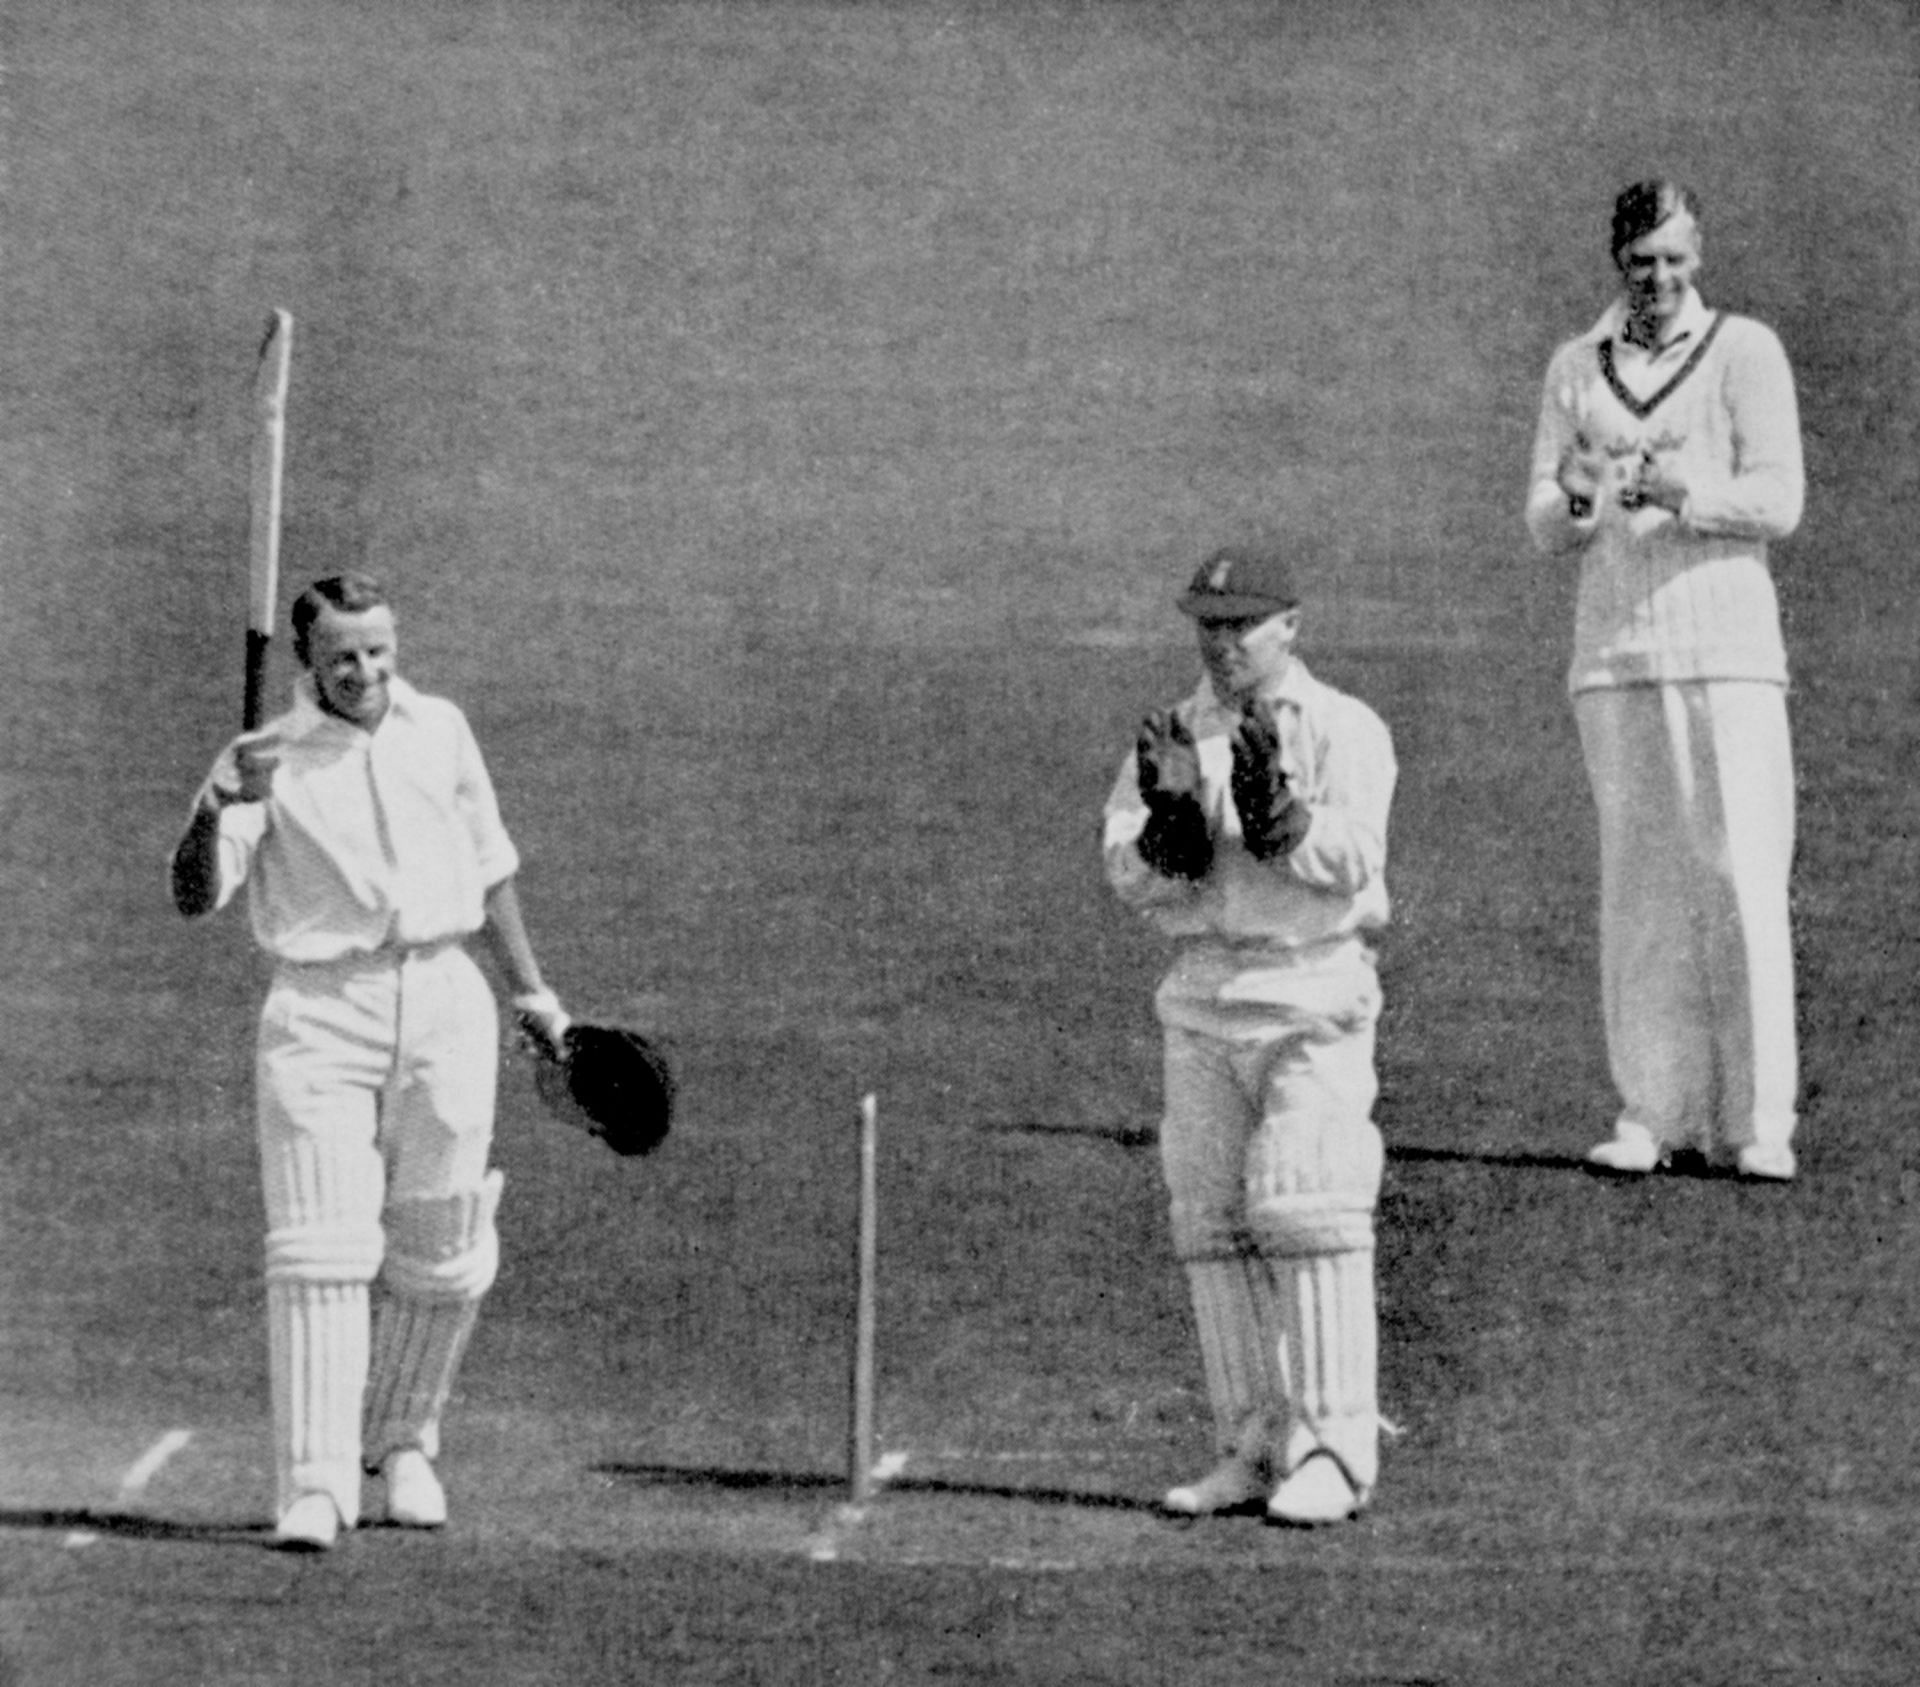 With the series tied 1-1, Bradman&rsquo;s superb 232 turned the final Test in Australia&rsquo;s favour in this magical England tour of 1930. Having hit up a still unsurpassed 974 runs in the series, including a century, two double centuries and the record triple century, and won the Ashes, Bradman became the biggest superstar the game has ever seen